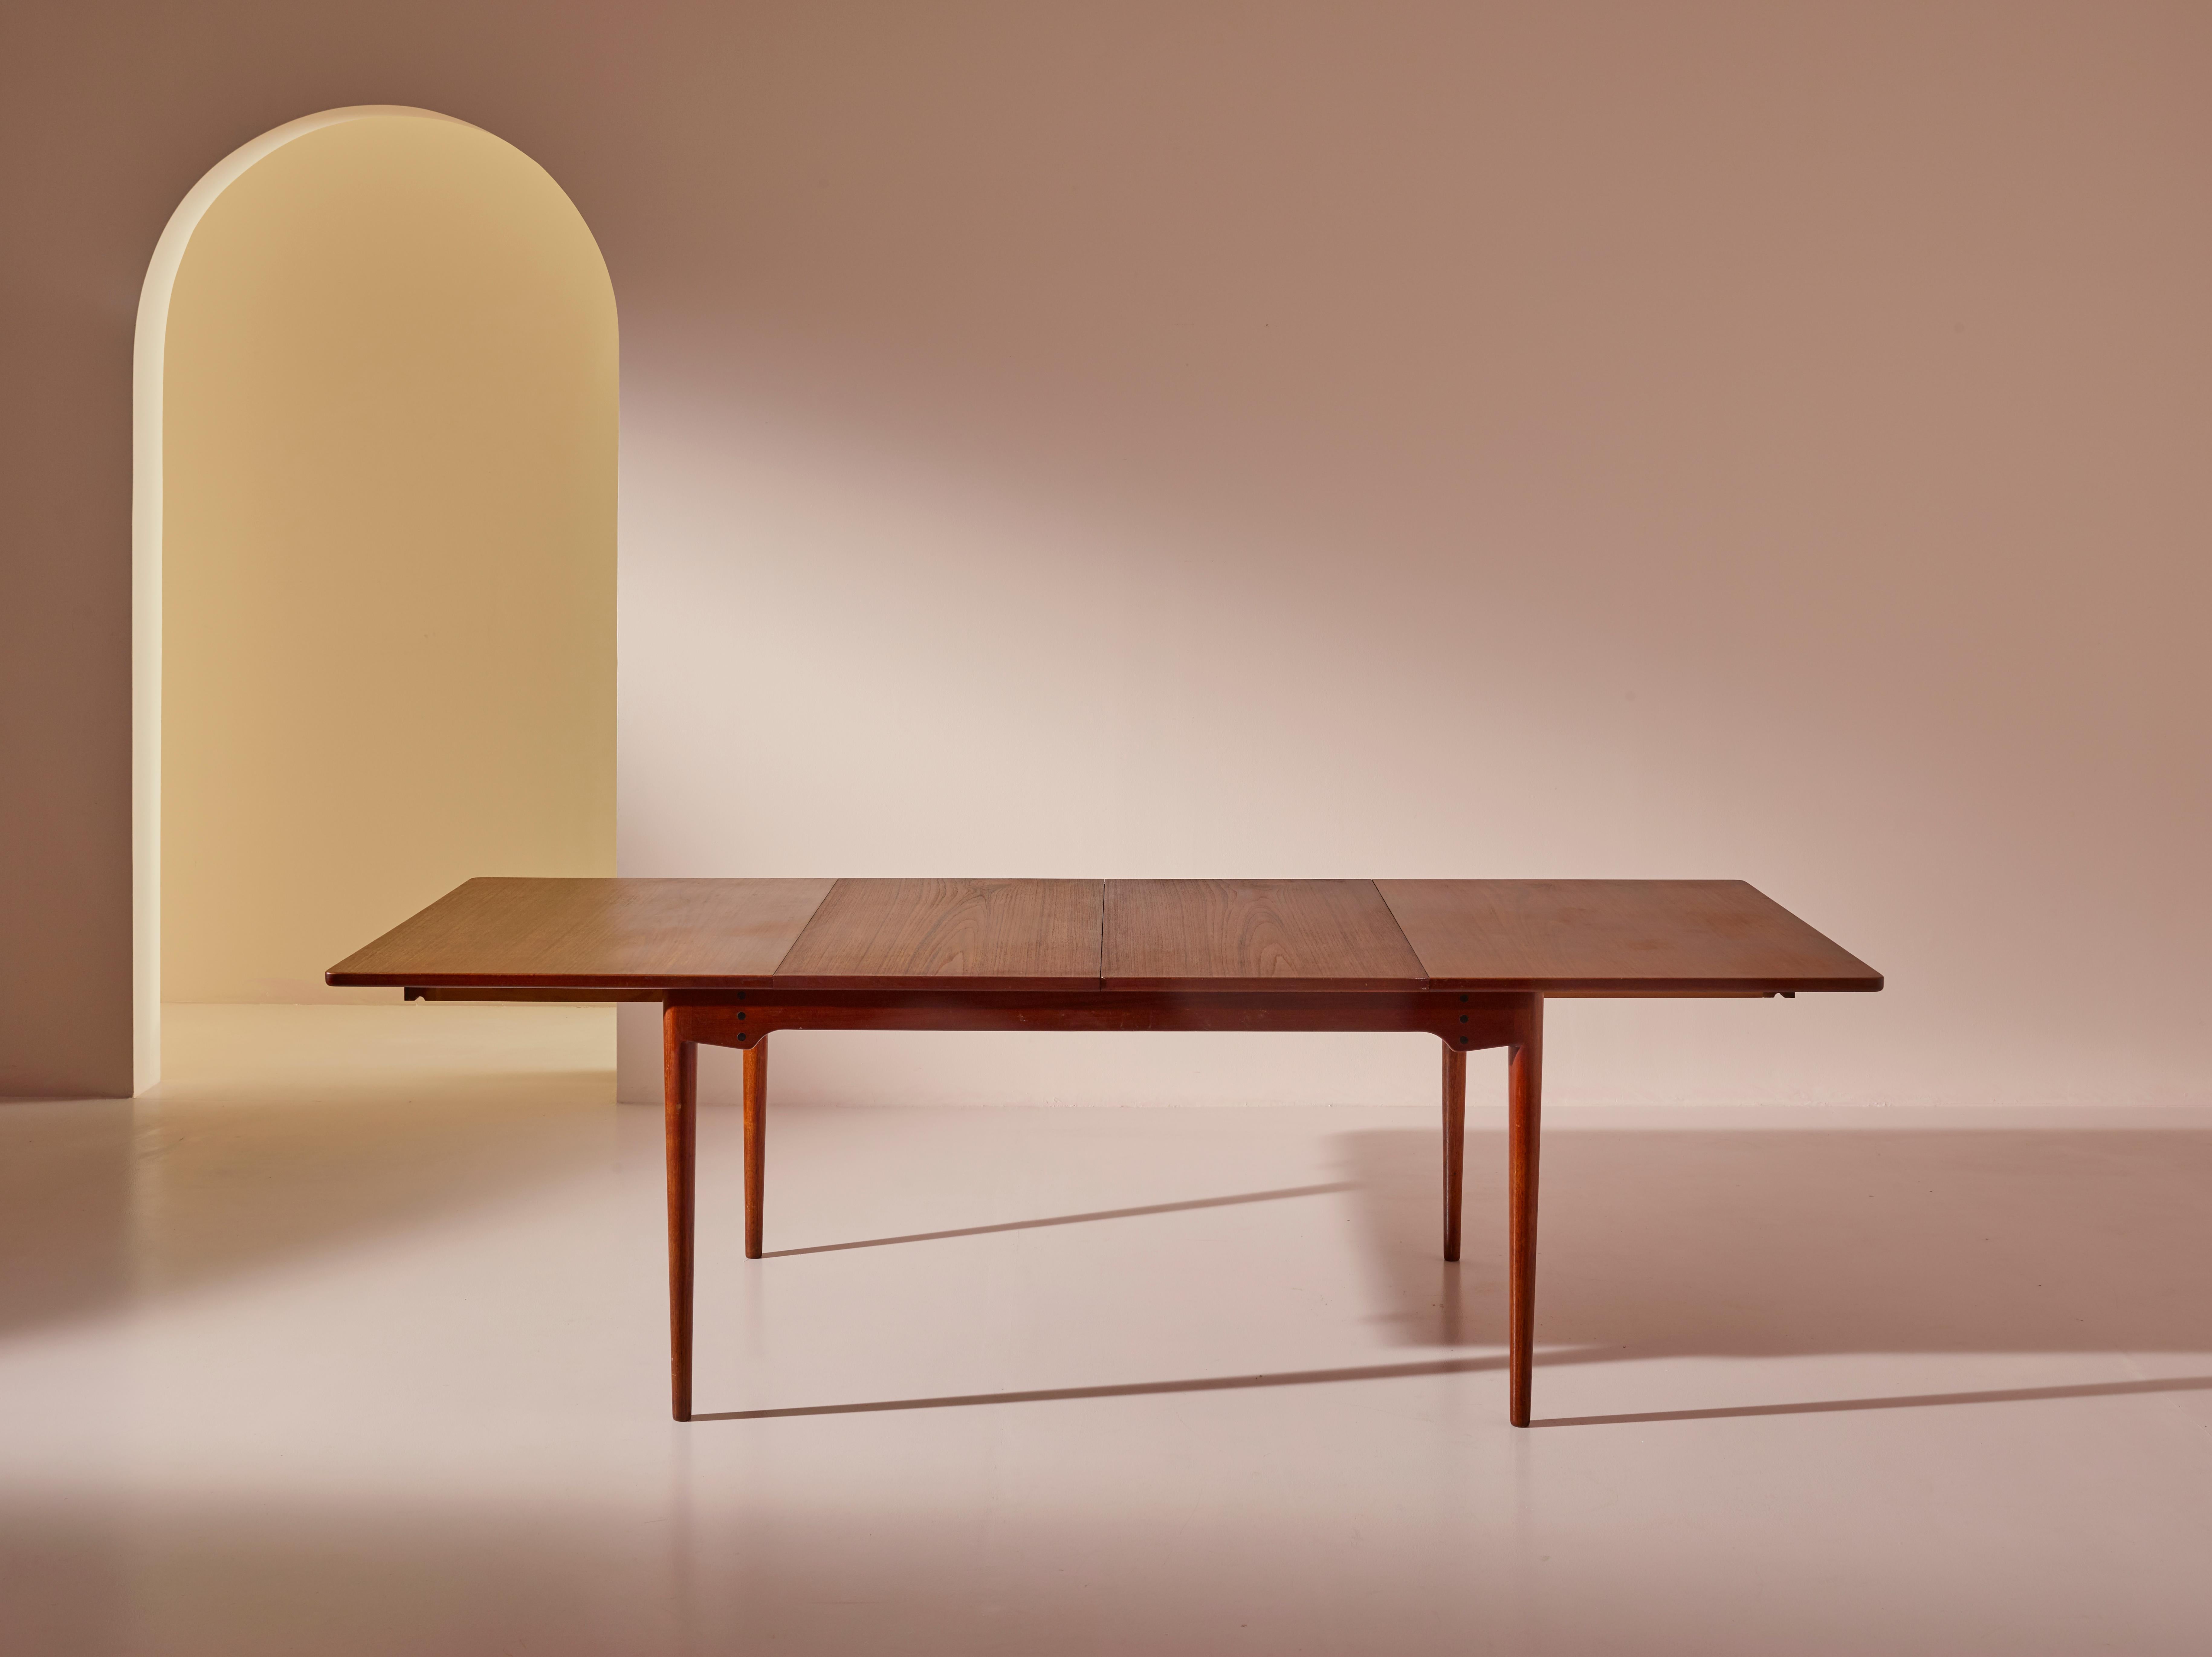 A model BO65 extendable dining table designed by Finn Juhl and manufactured by the Danish cabinetmaker Bovirke. Created in 1952, this model features a sleek and minimalist aesthetic with clean lines, organic shapes, and impeccable craftsmanship.